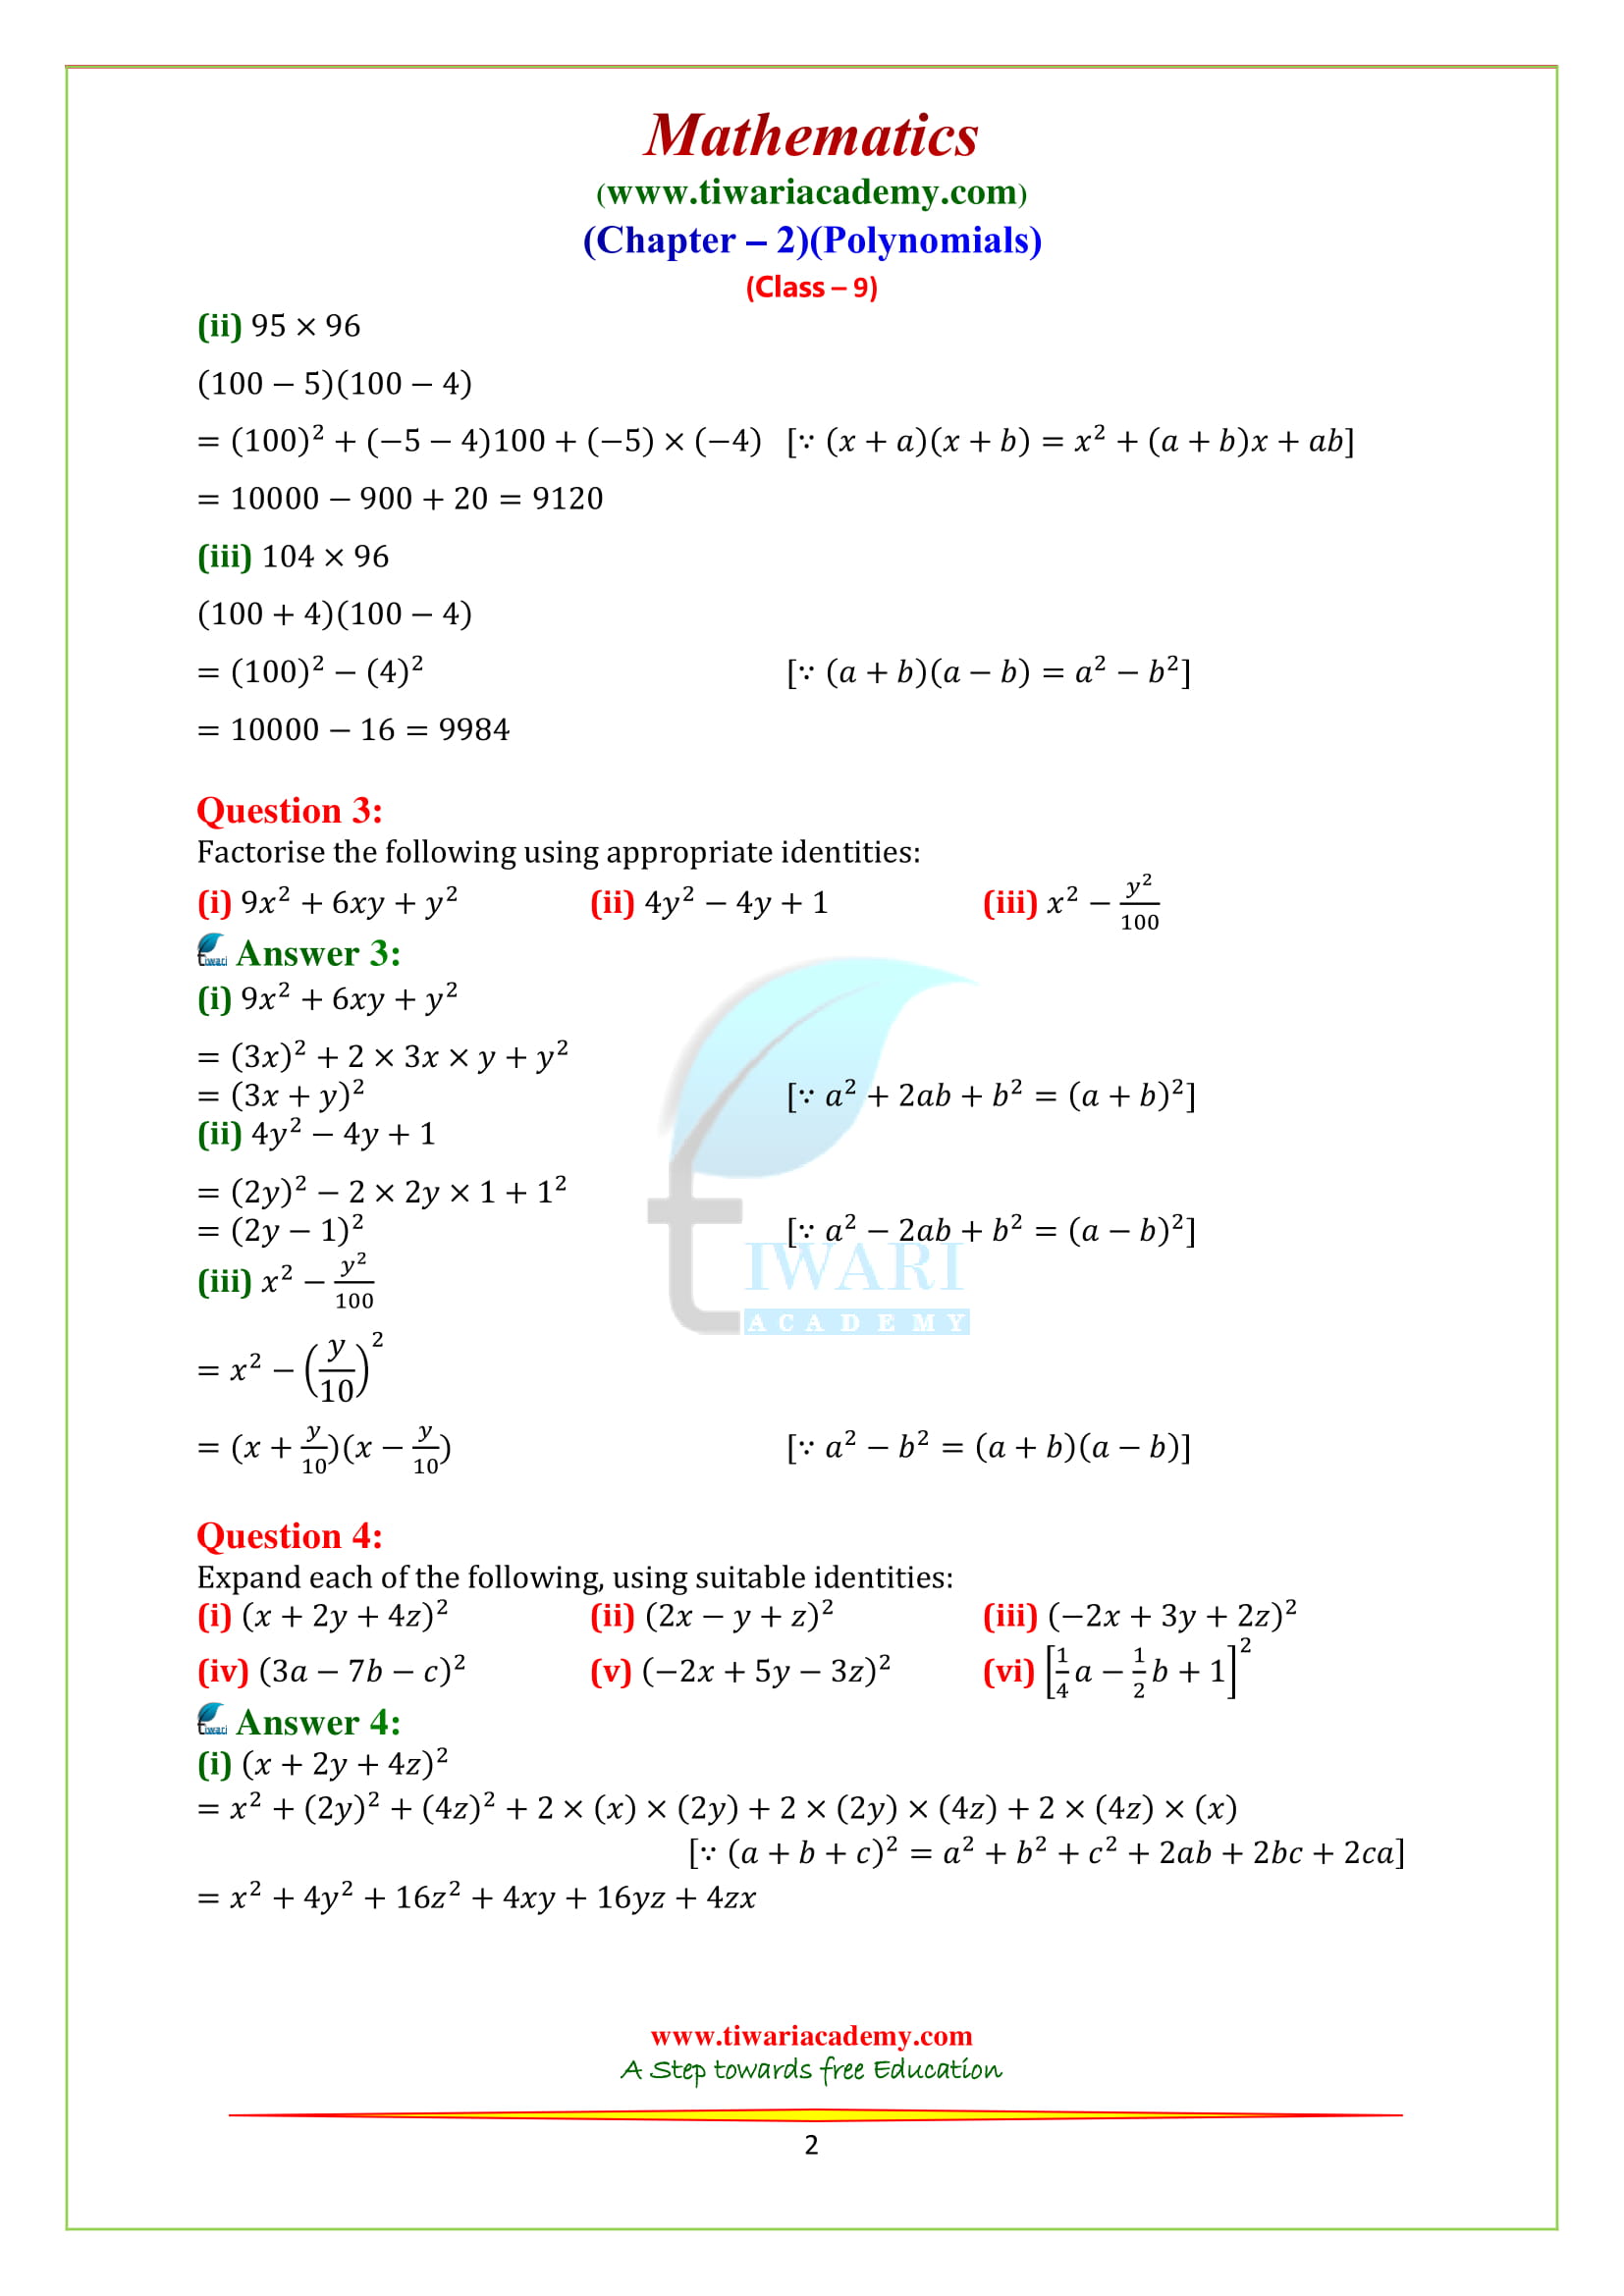 NCERT Solutions for class 9 Maths chapter 2 exercise 2.5